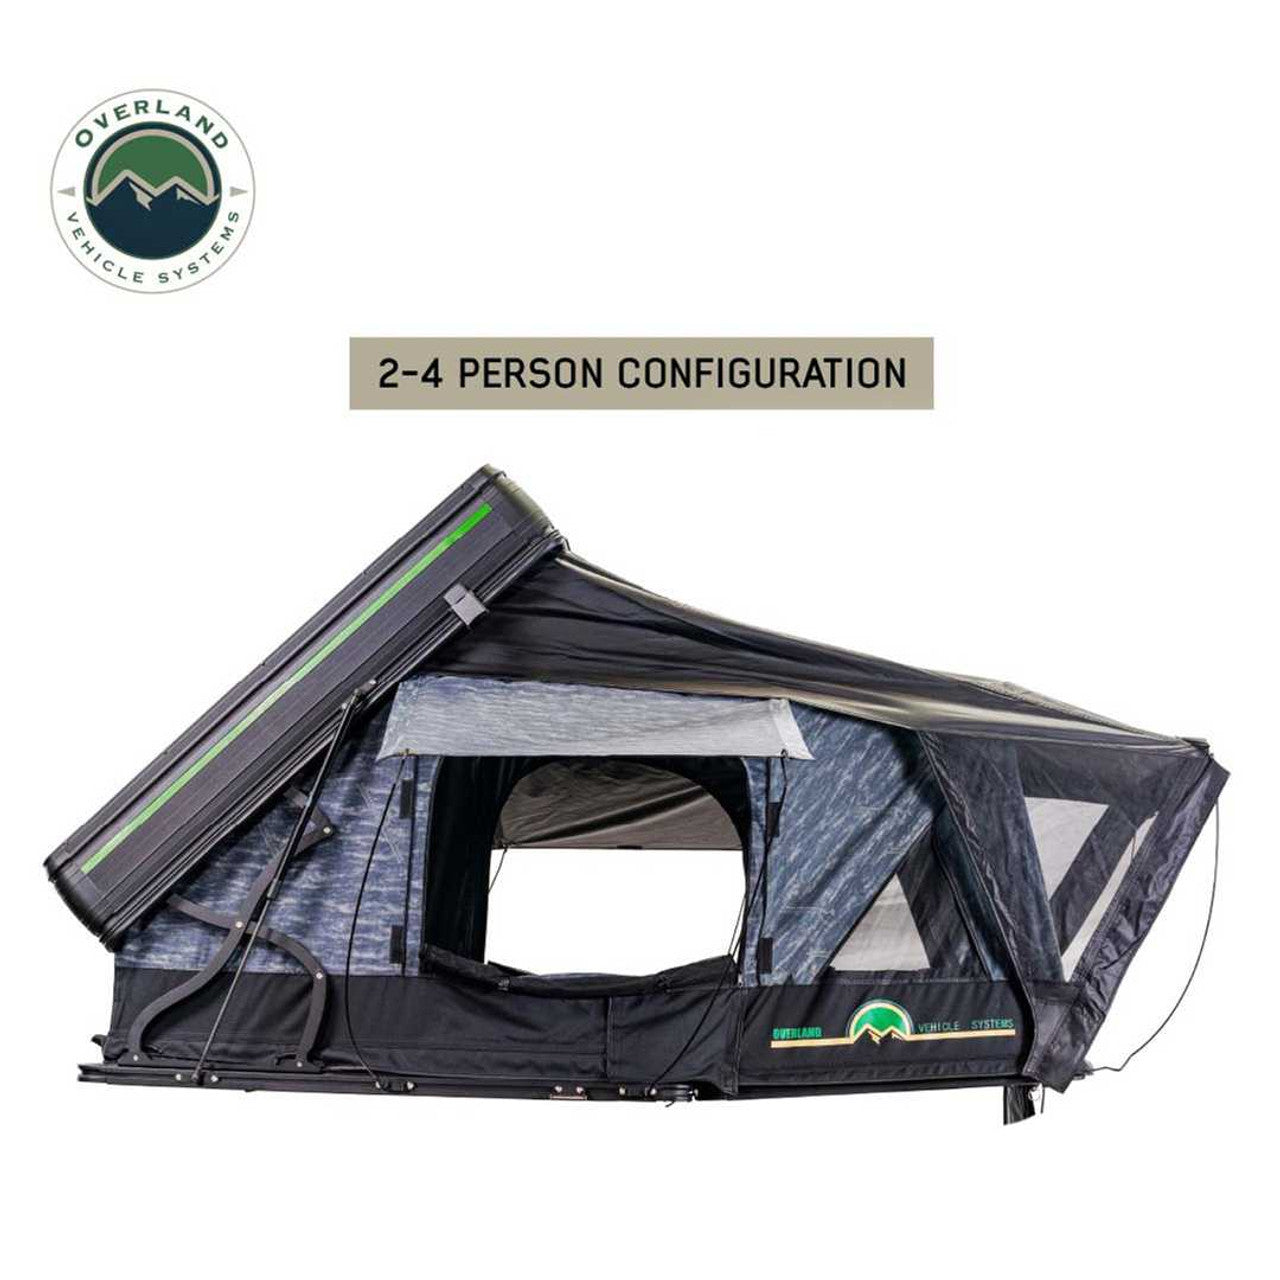 Overland Vehicle Systems XD Everest Cantilever Aluminum Roof Top Tent In Grey Body & Black Rainfly